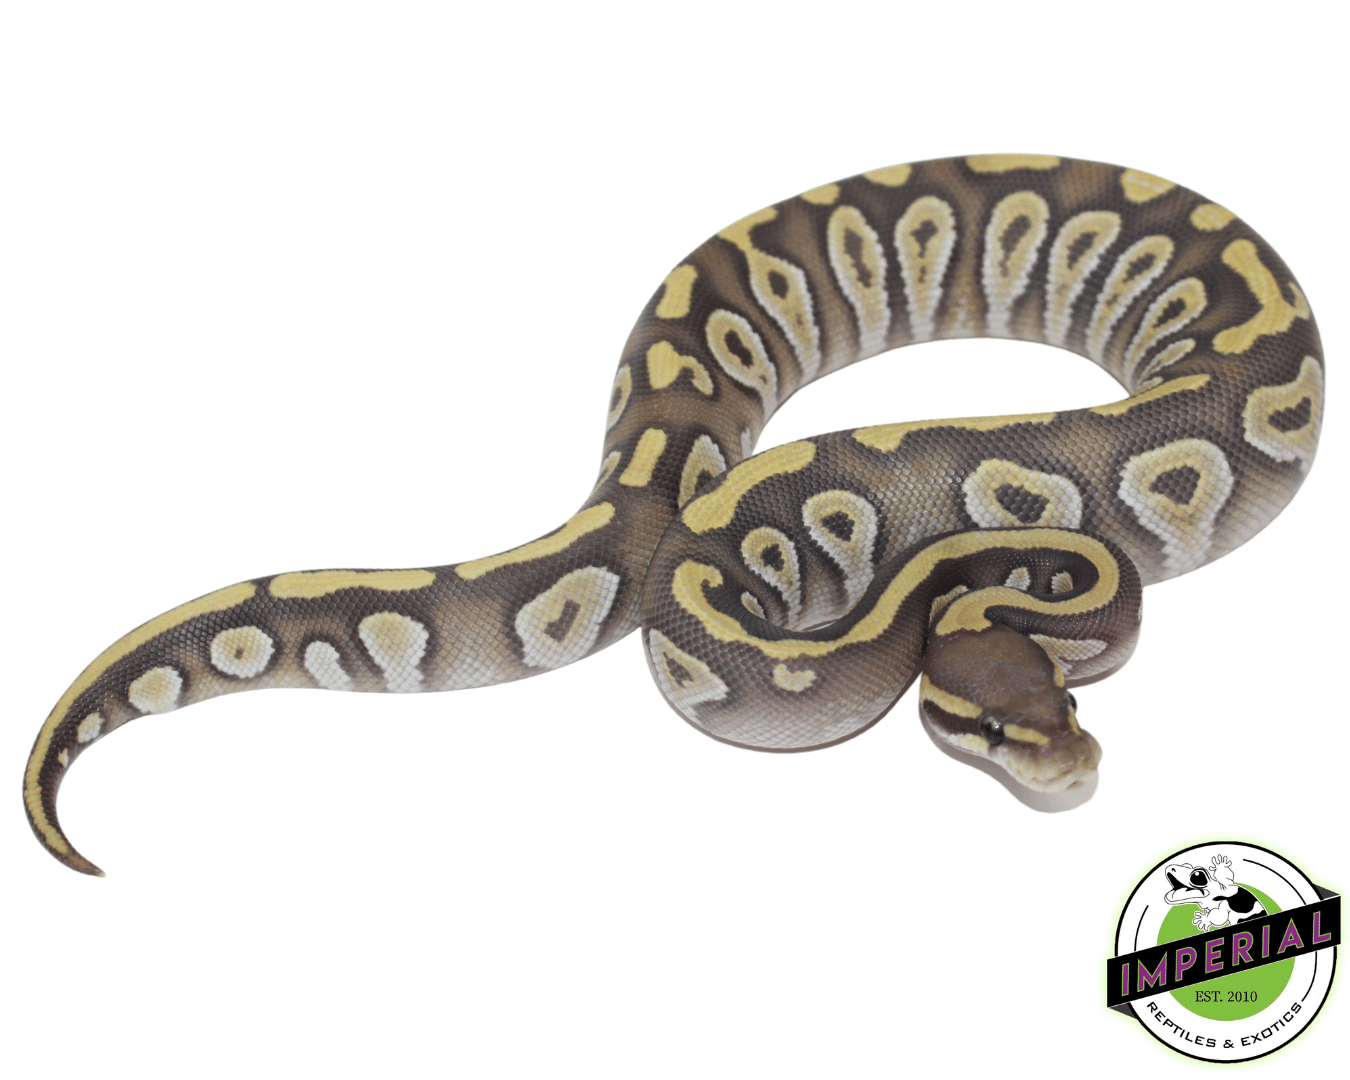 mojave ghost ball python for sale, buy reptiles online